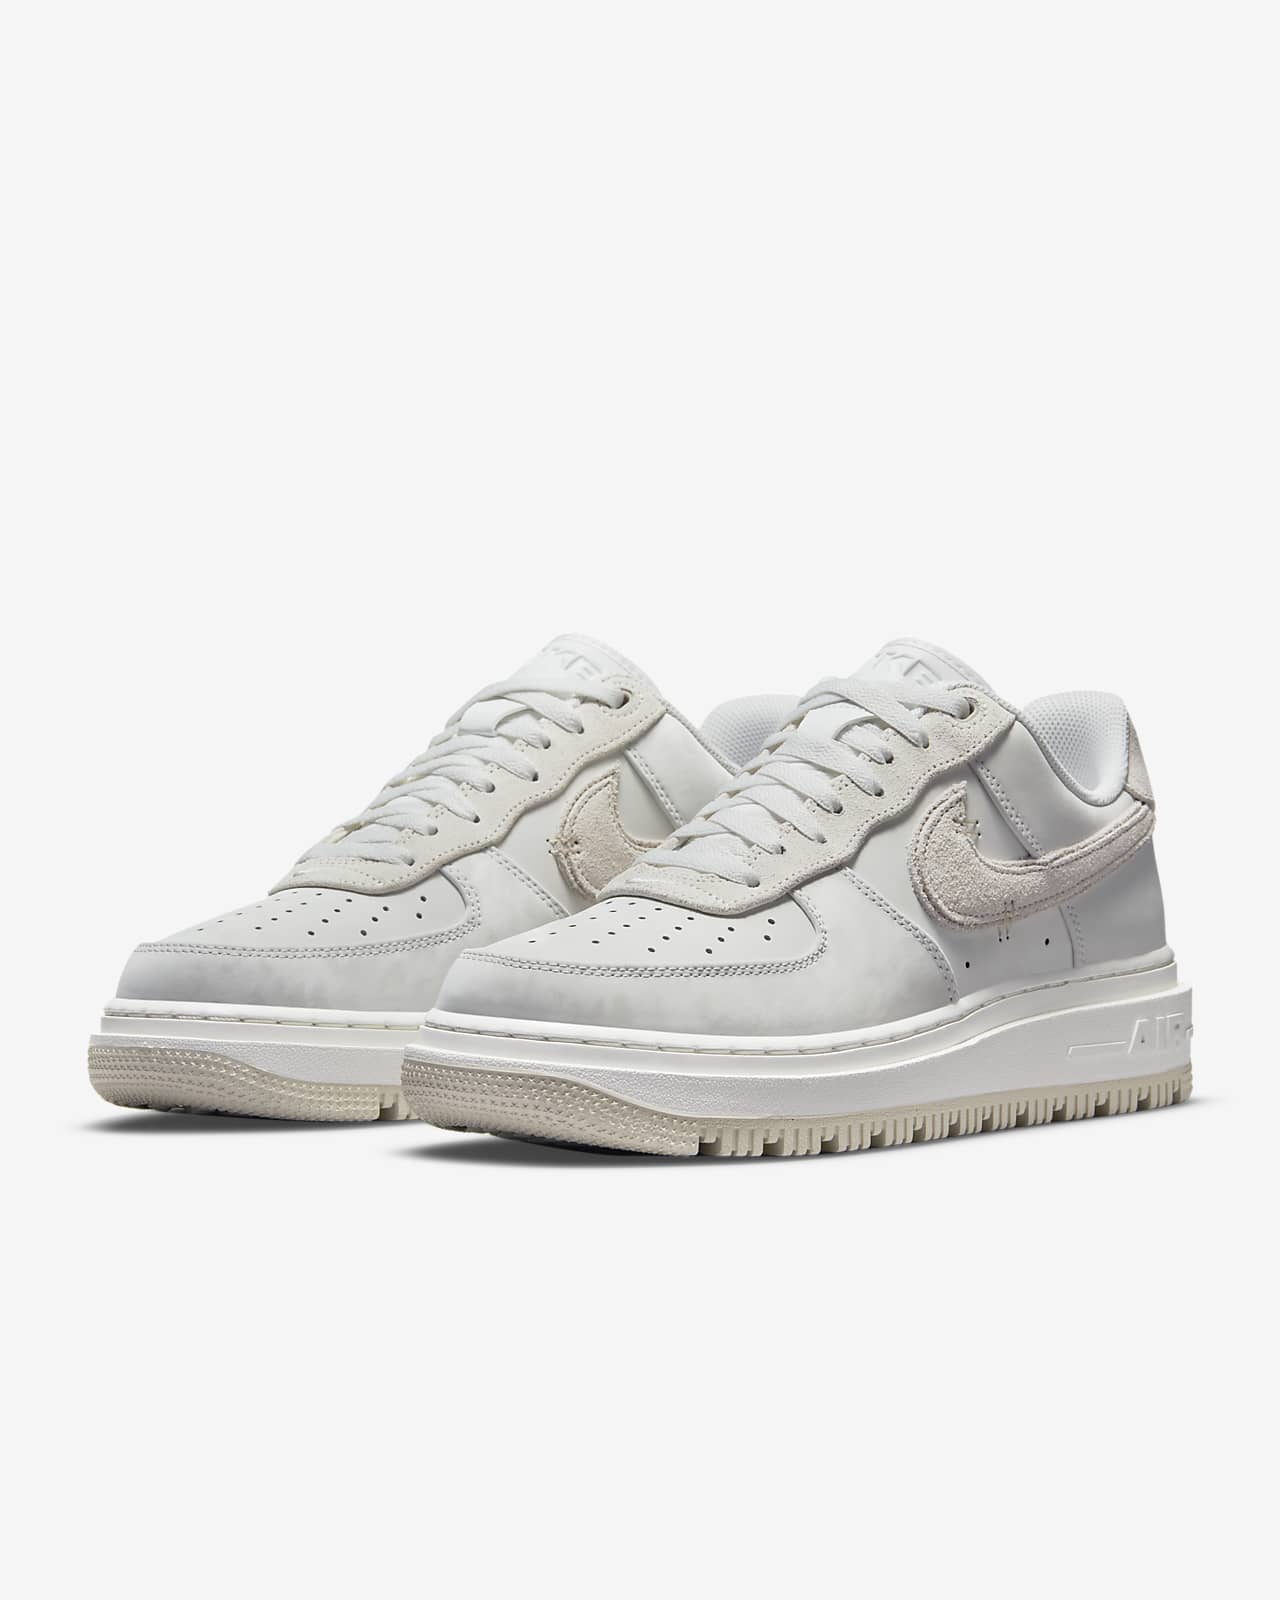 Nike Air Force 1 Luxe Men's Shoes. Nike NL